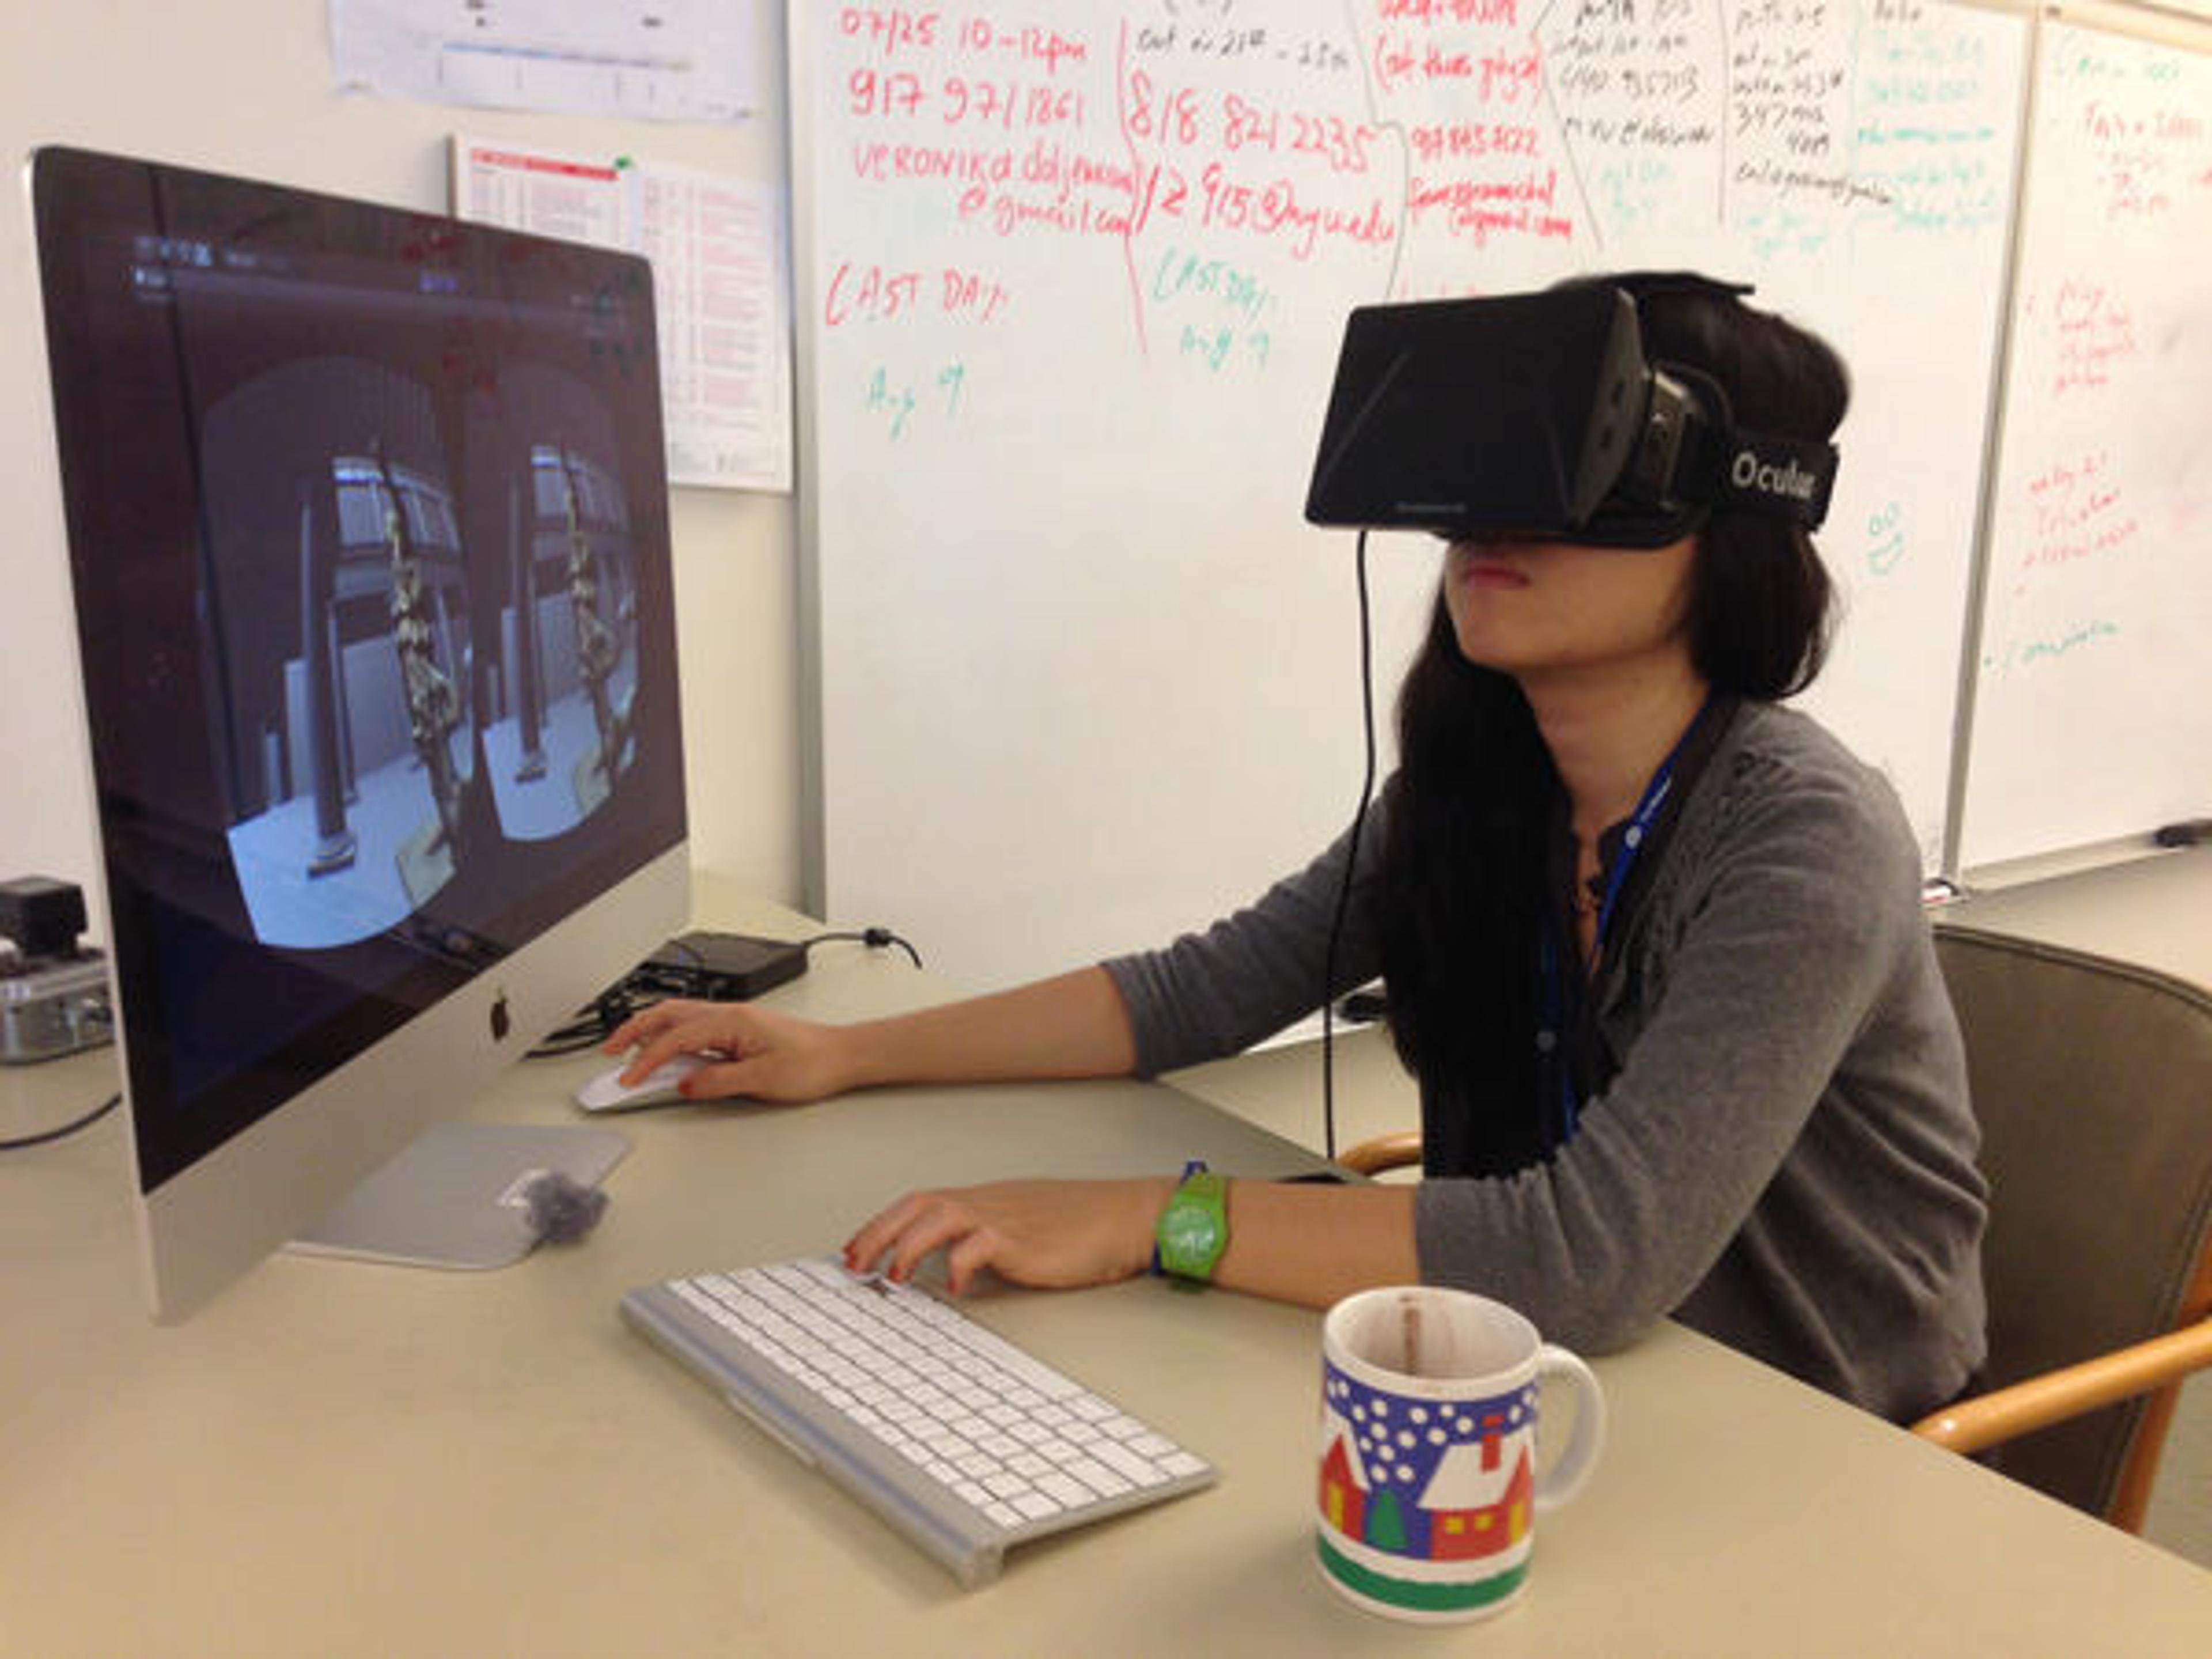 Laura Chen, Media Lab intern, Spring 2014. Virtual Reality Tour of the Met